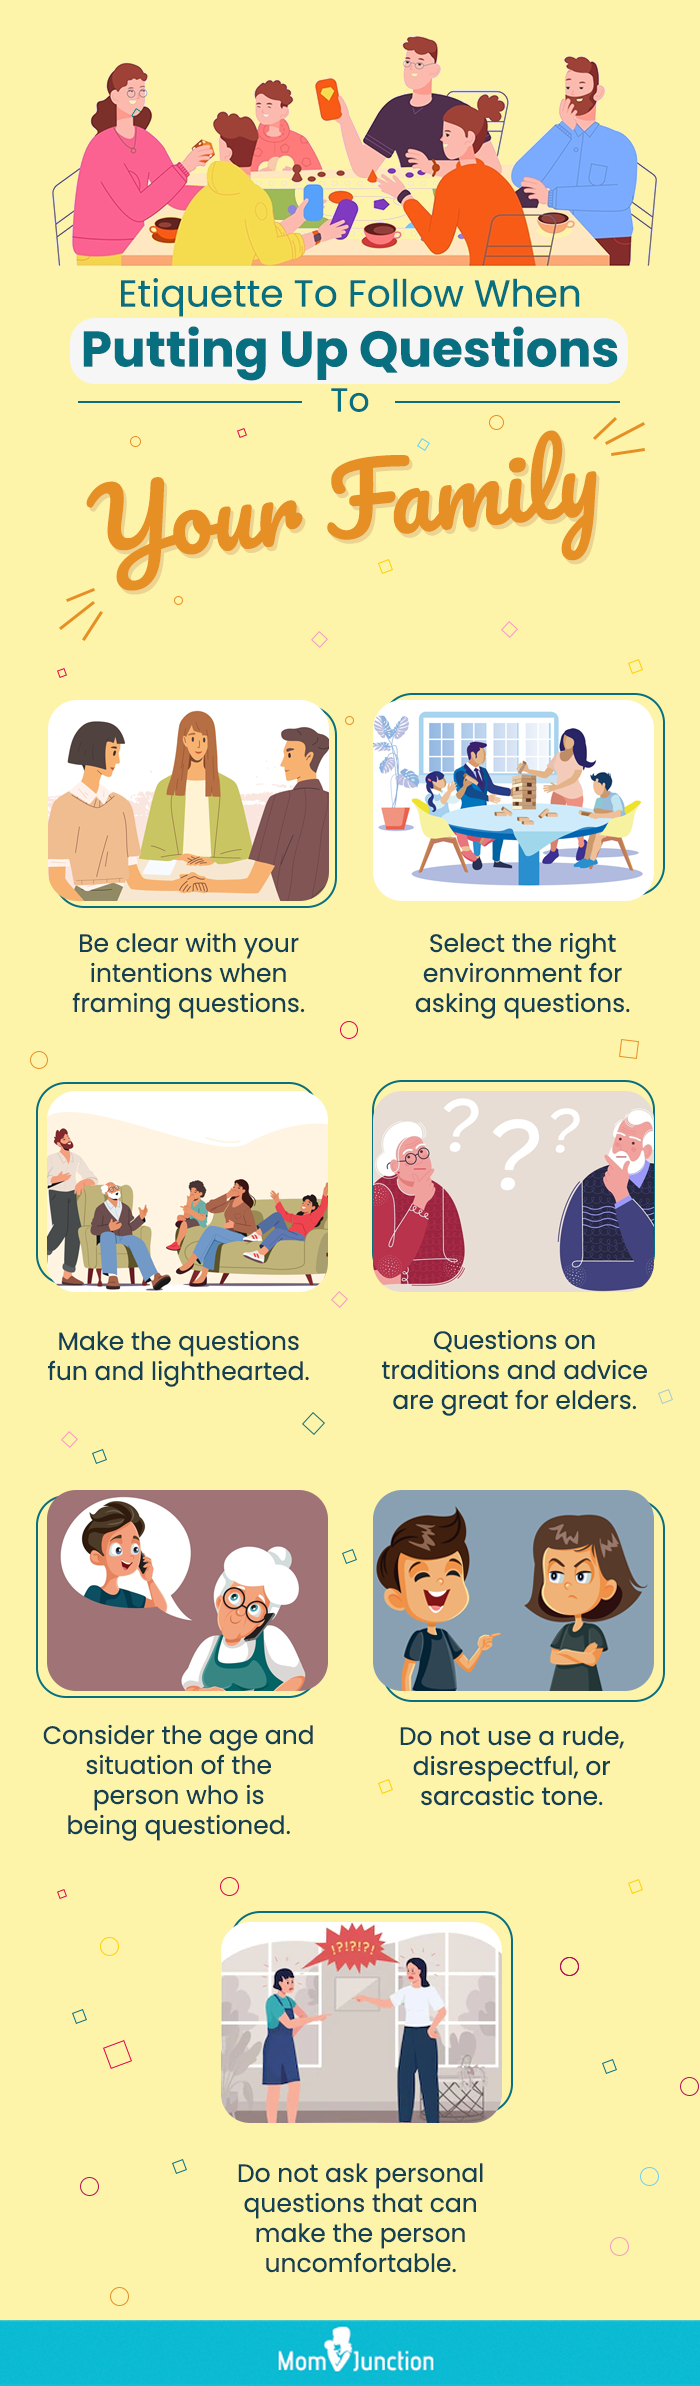 etiquette to follow when putting up questions to your family (infographic)